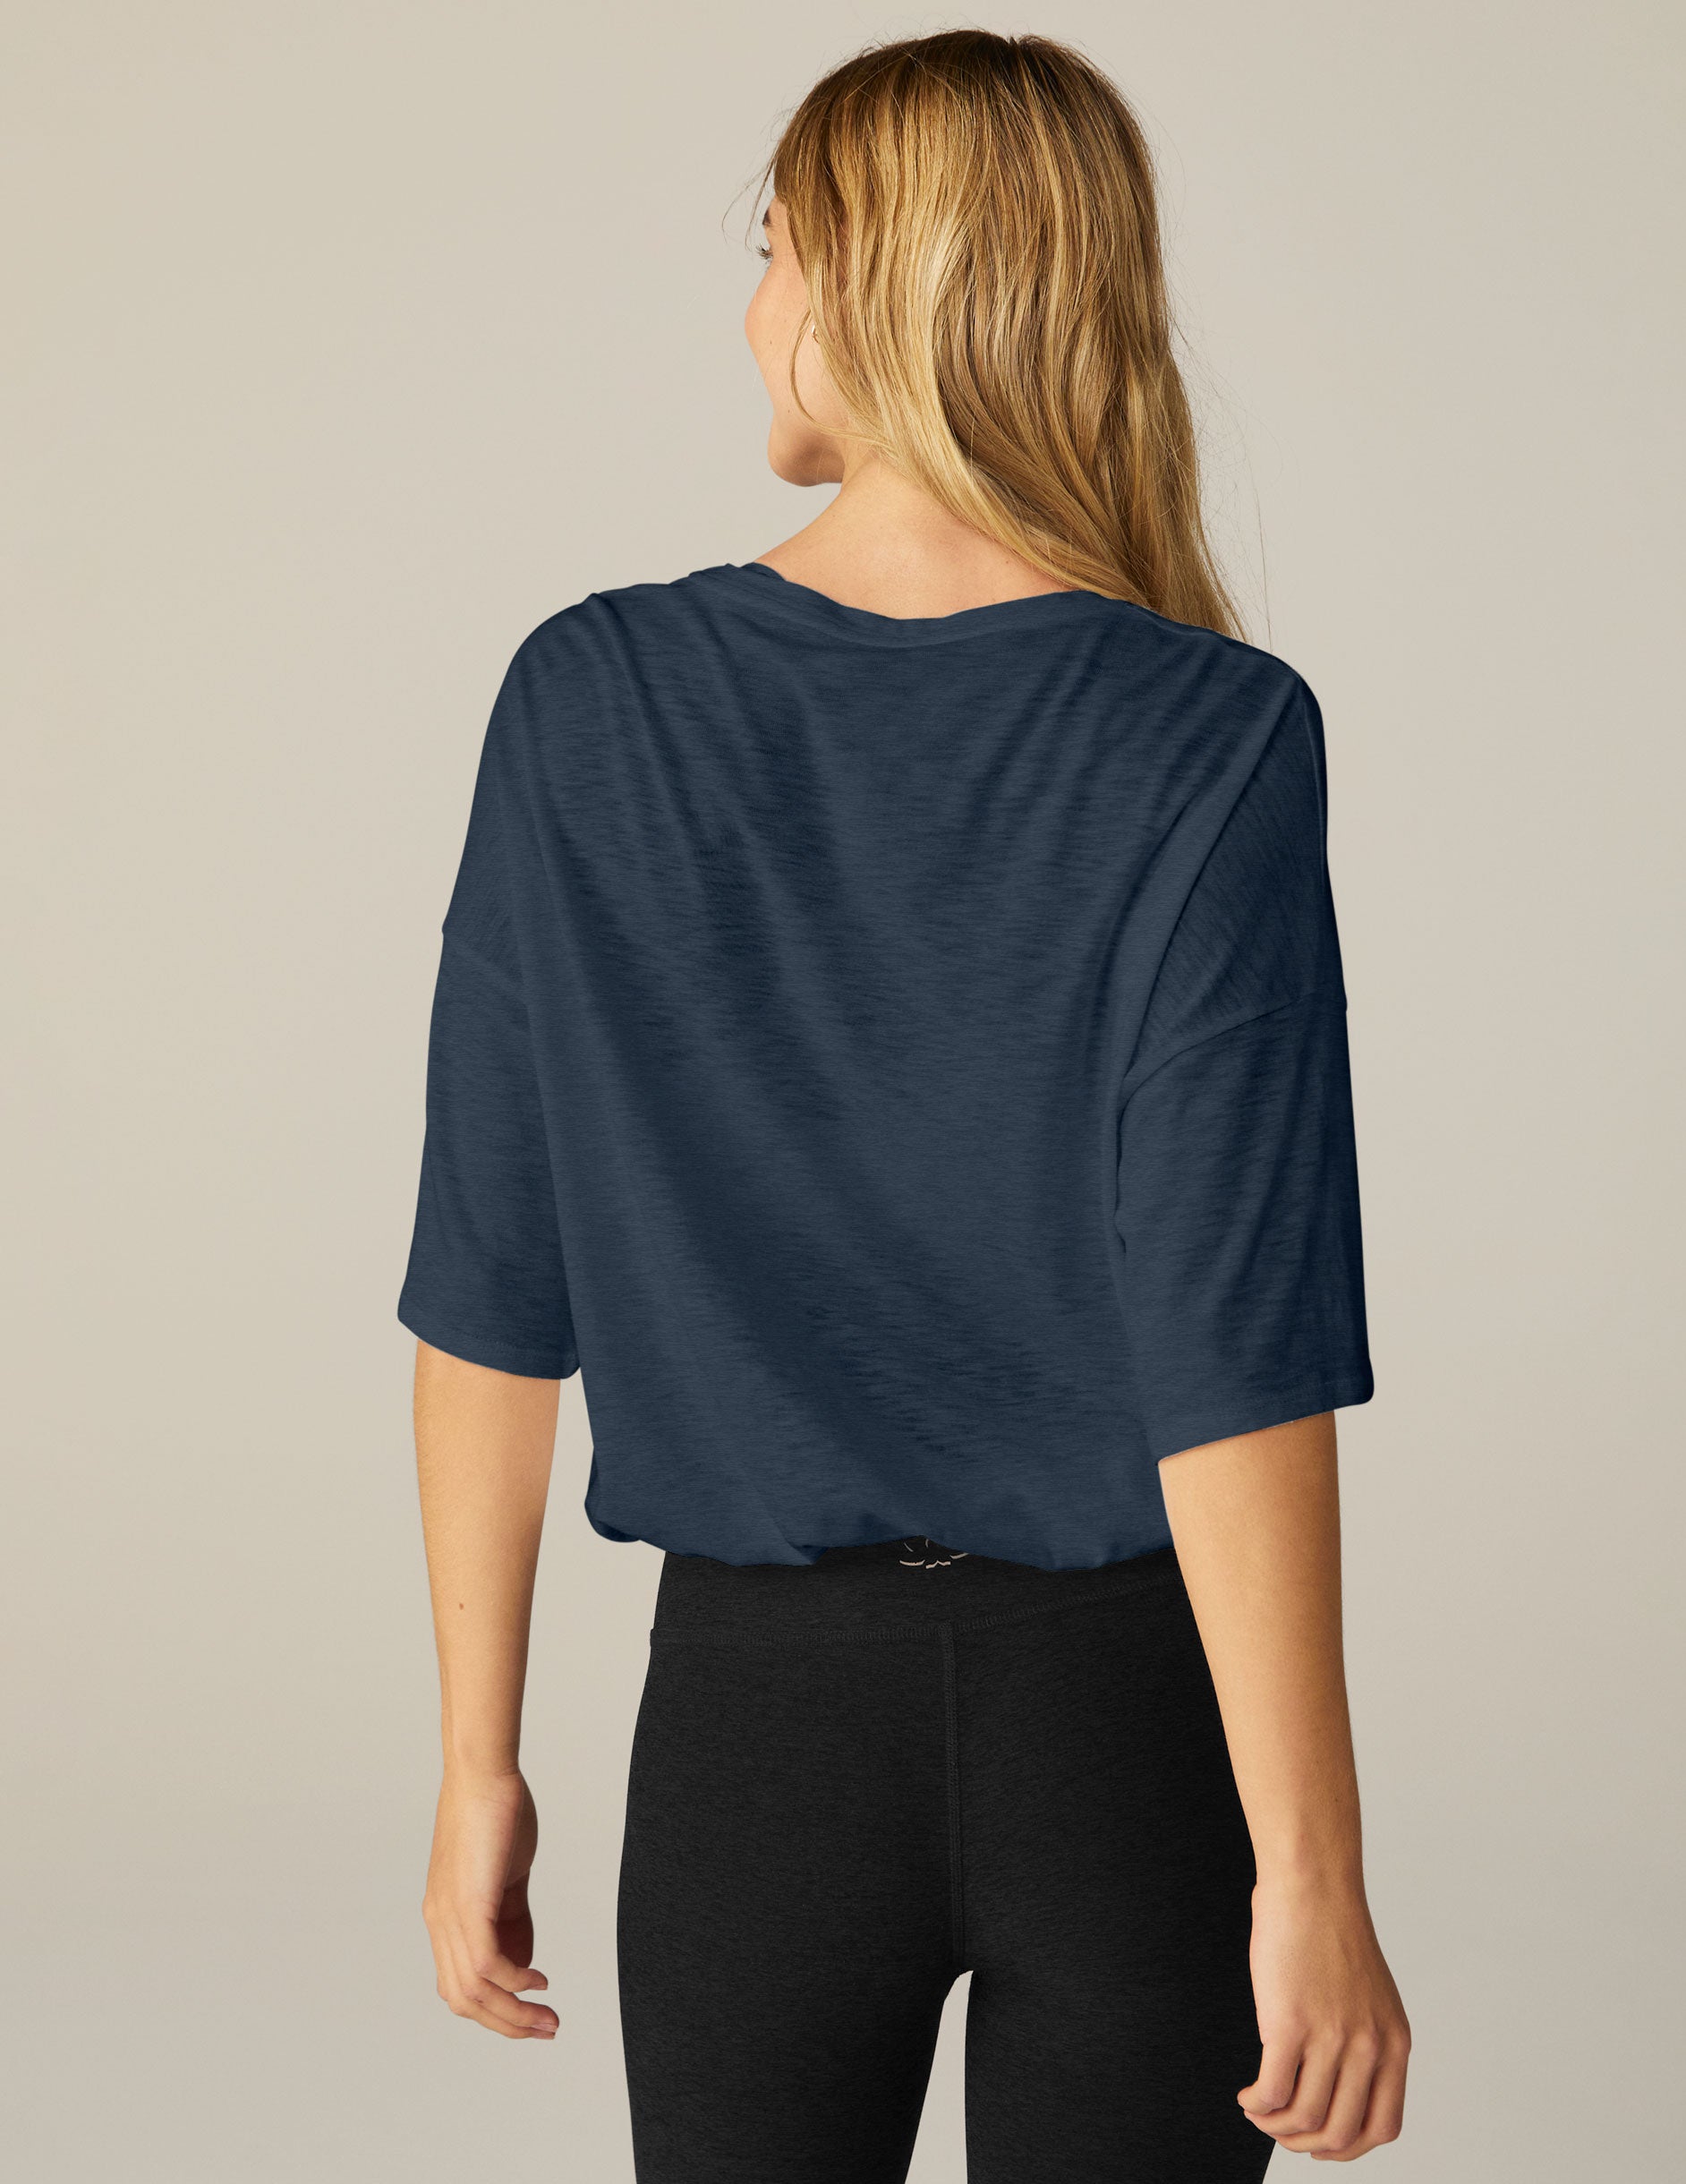 blue short sleeve top with tie detail